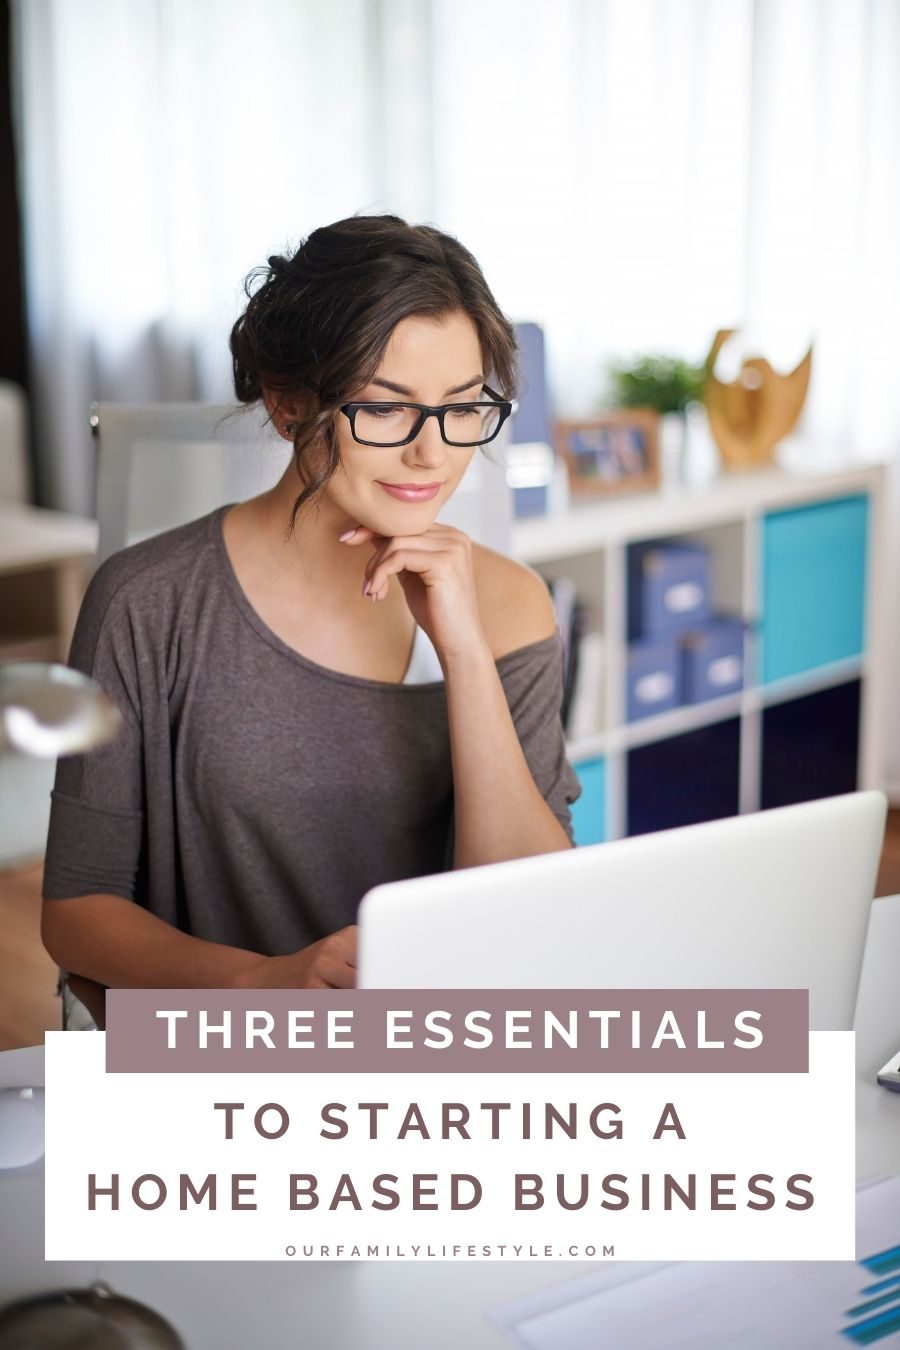 3 Essentials To Starting A Home Based Business